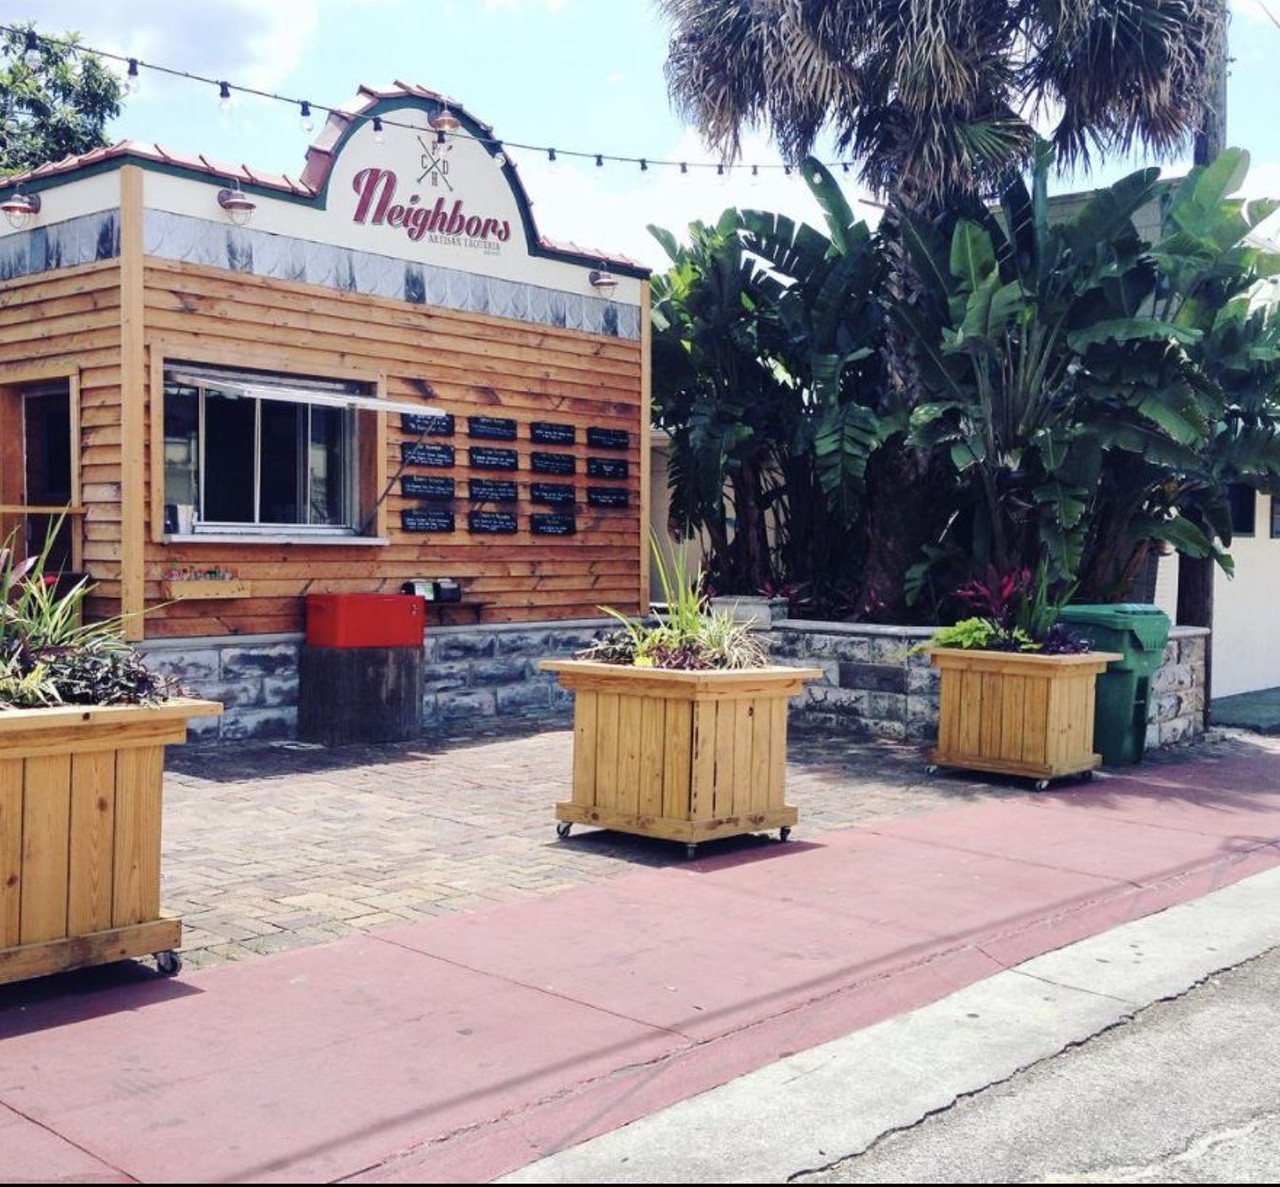 Neighbors Artisan Taqueria
112 W. Georgia Ave., DeLand, 386-279-0394
Neighbors is known for their delicious tacos, vegan options and housemade chips. They are actual neighbors with Persimmon Hollow so you can also take advantage and wash it all down with some drinks. 
Photo via morginn_ashley/Instagram